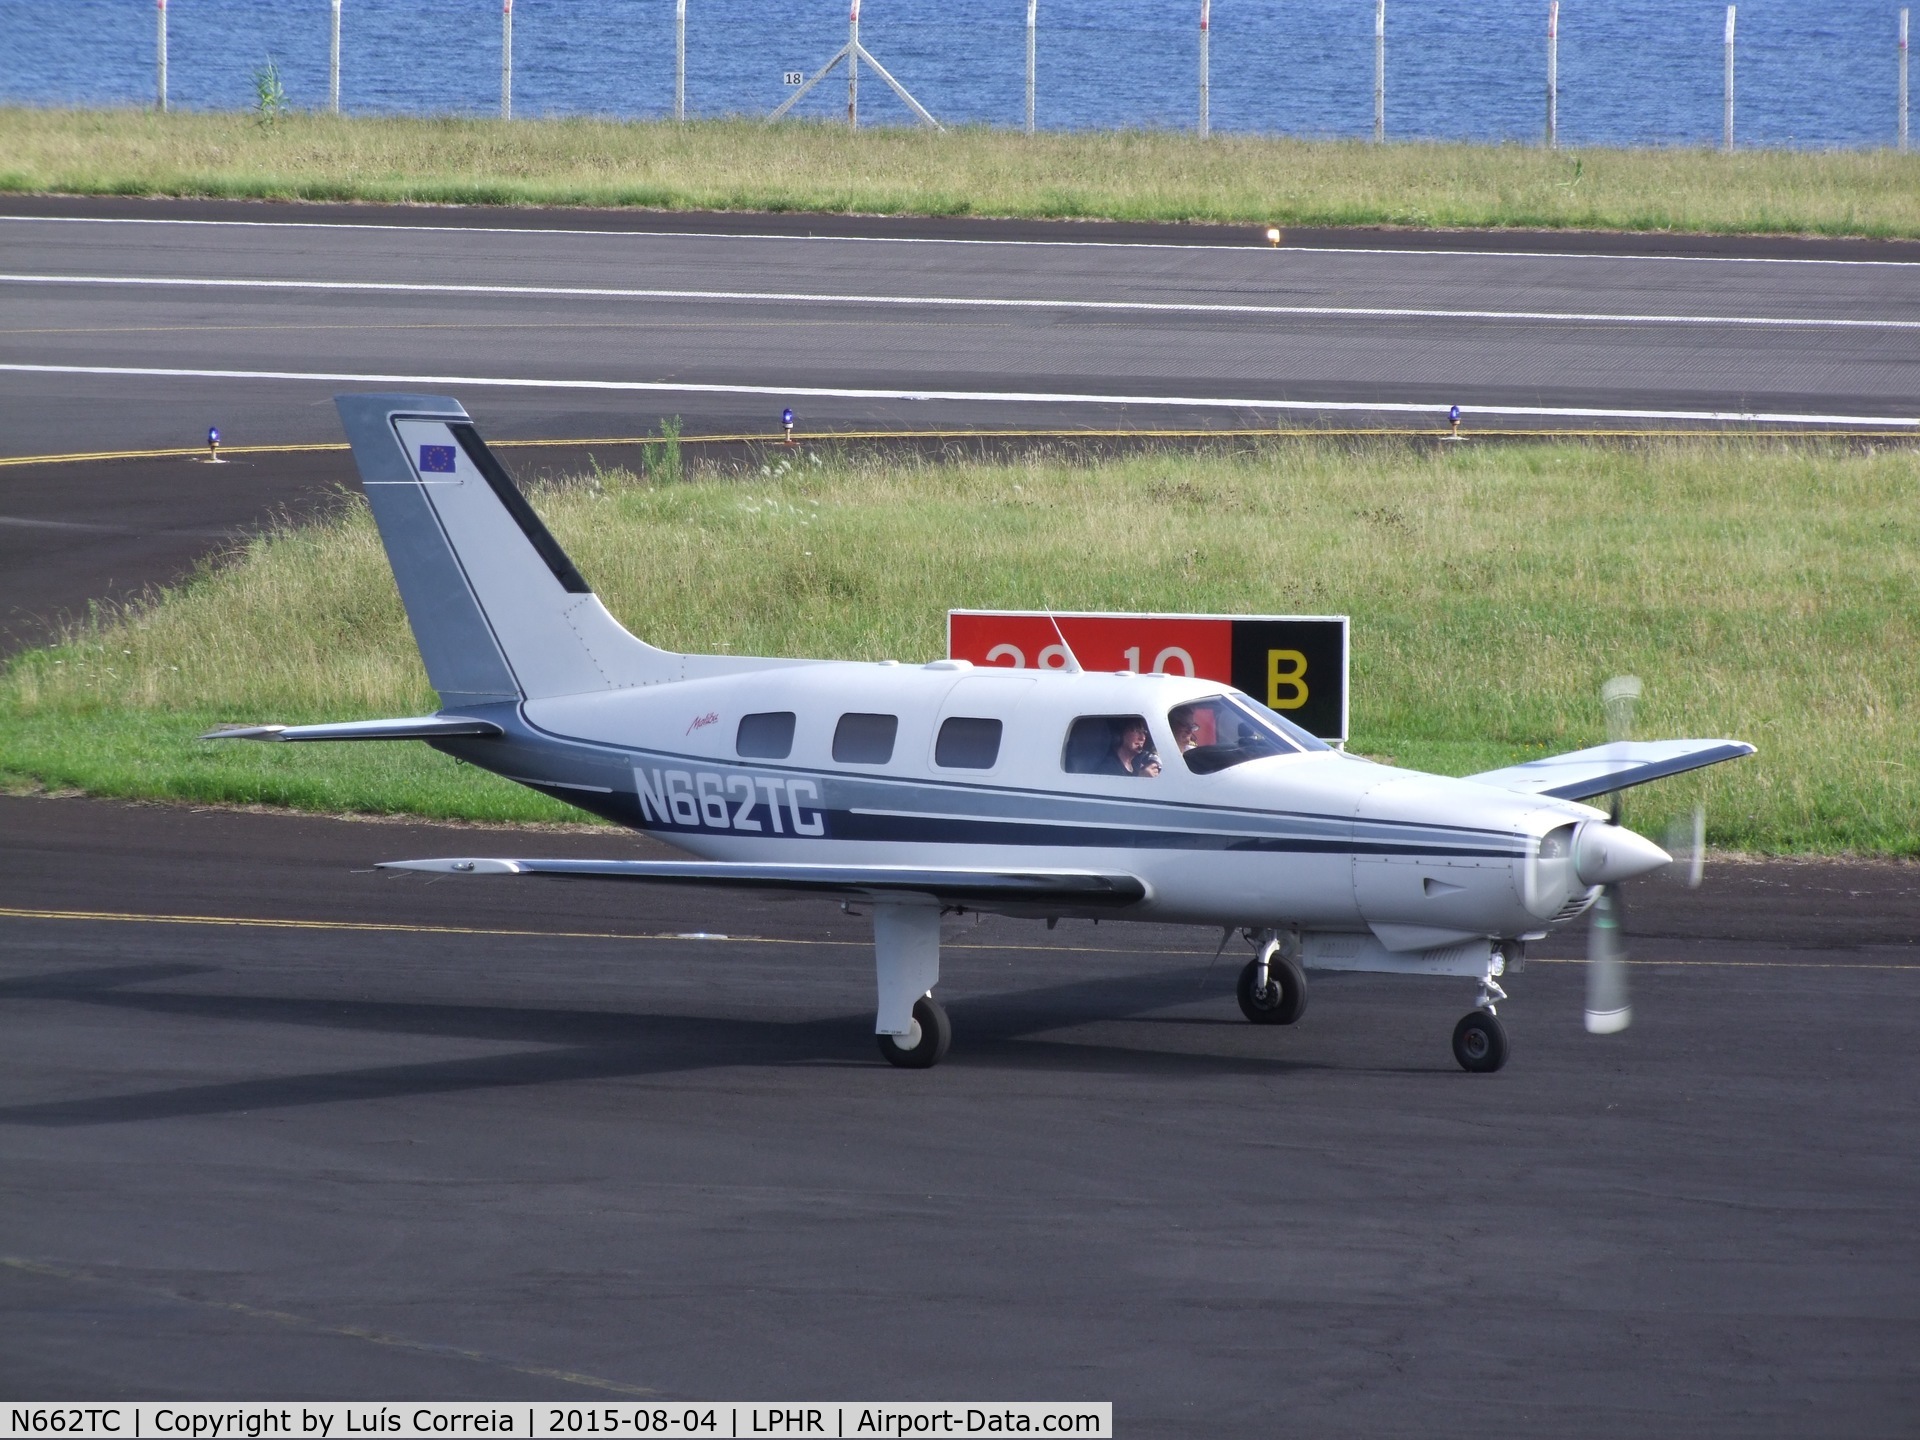 N662TC, 1985 Piper PA-46-310P Malibu C/N 46-8508095, Landing at Horta, island of Faial, Azores, after crossing the Atlantic from St. Johns, Canada, a 1200NM leg. Captain Karl-Heinz Zahorsky